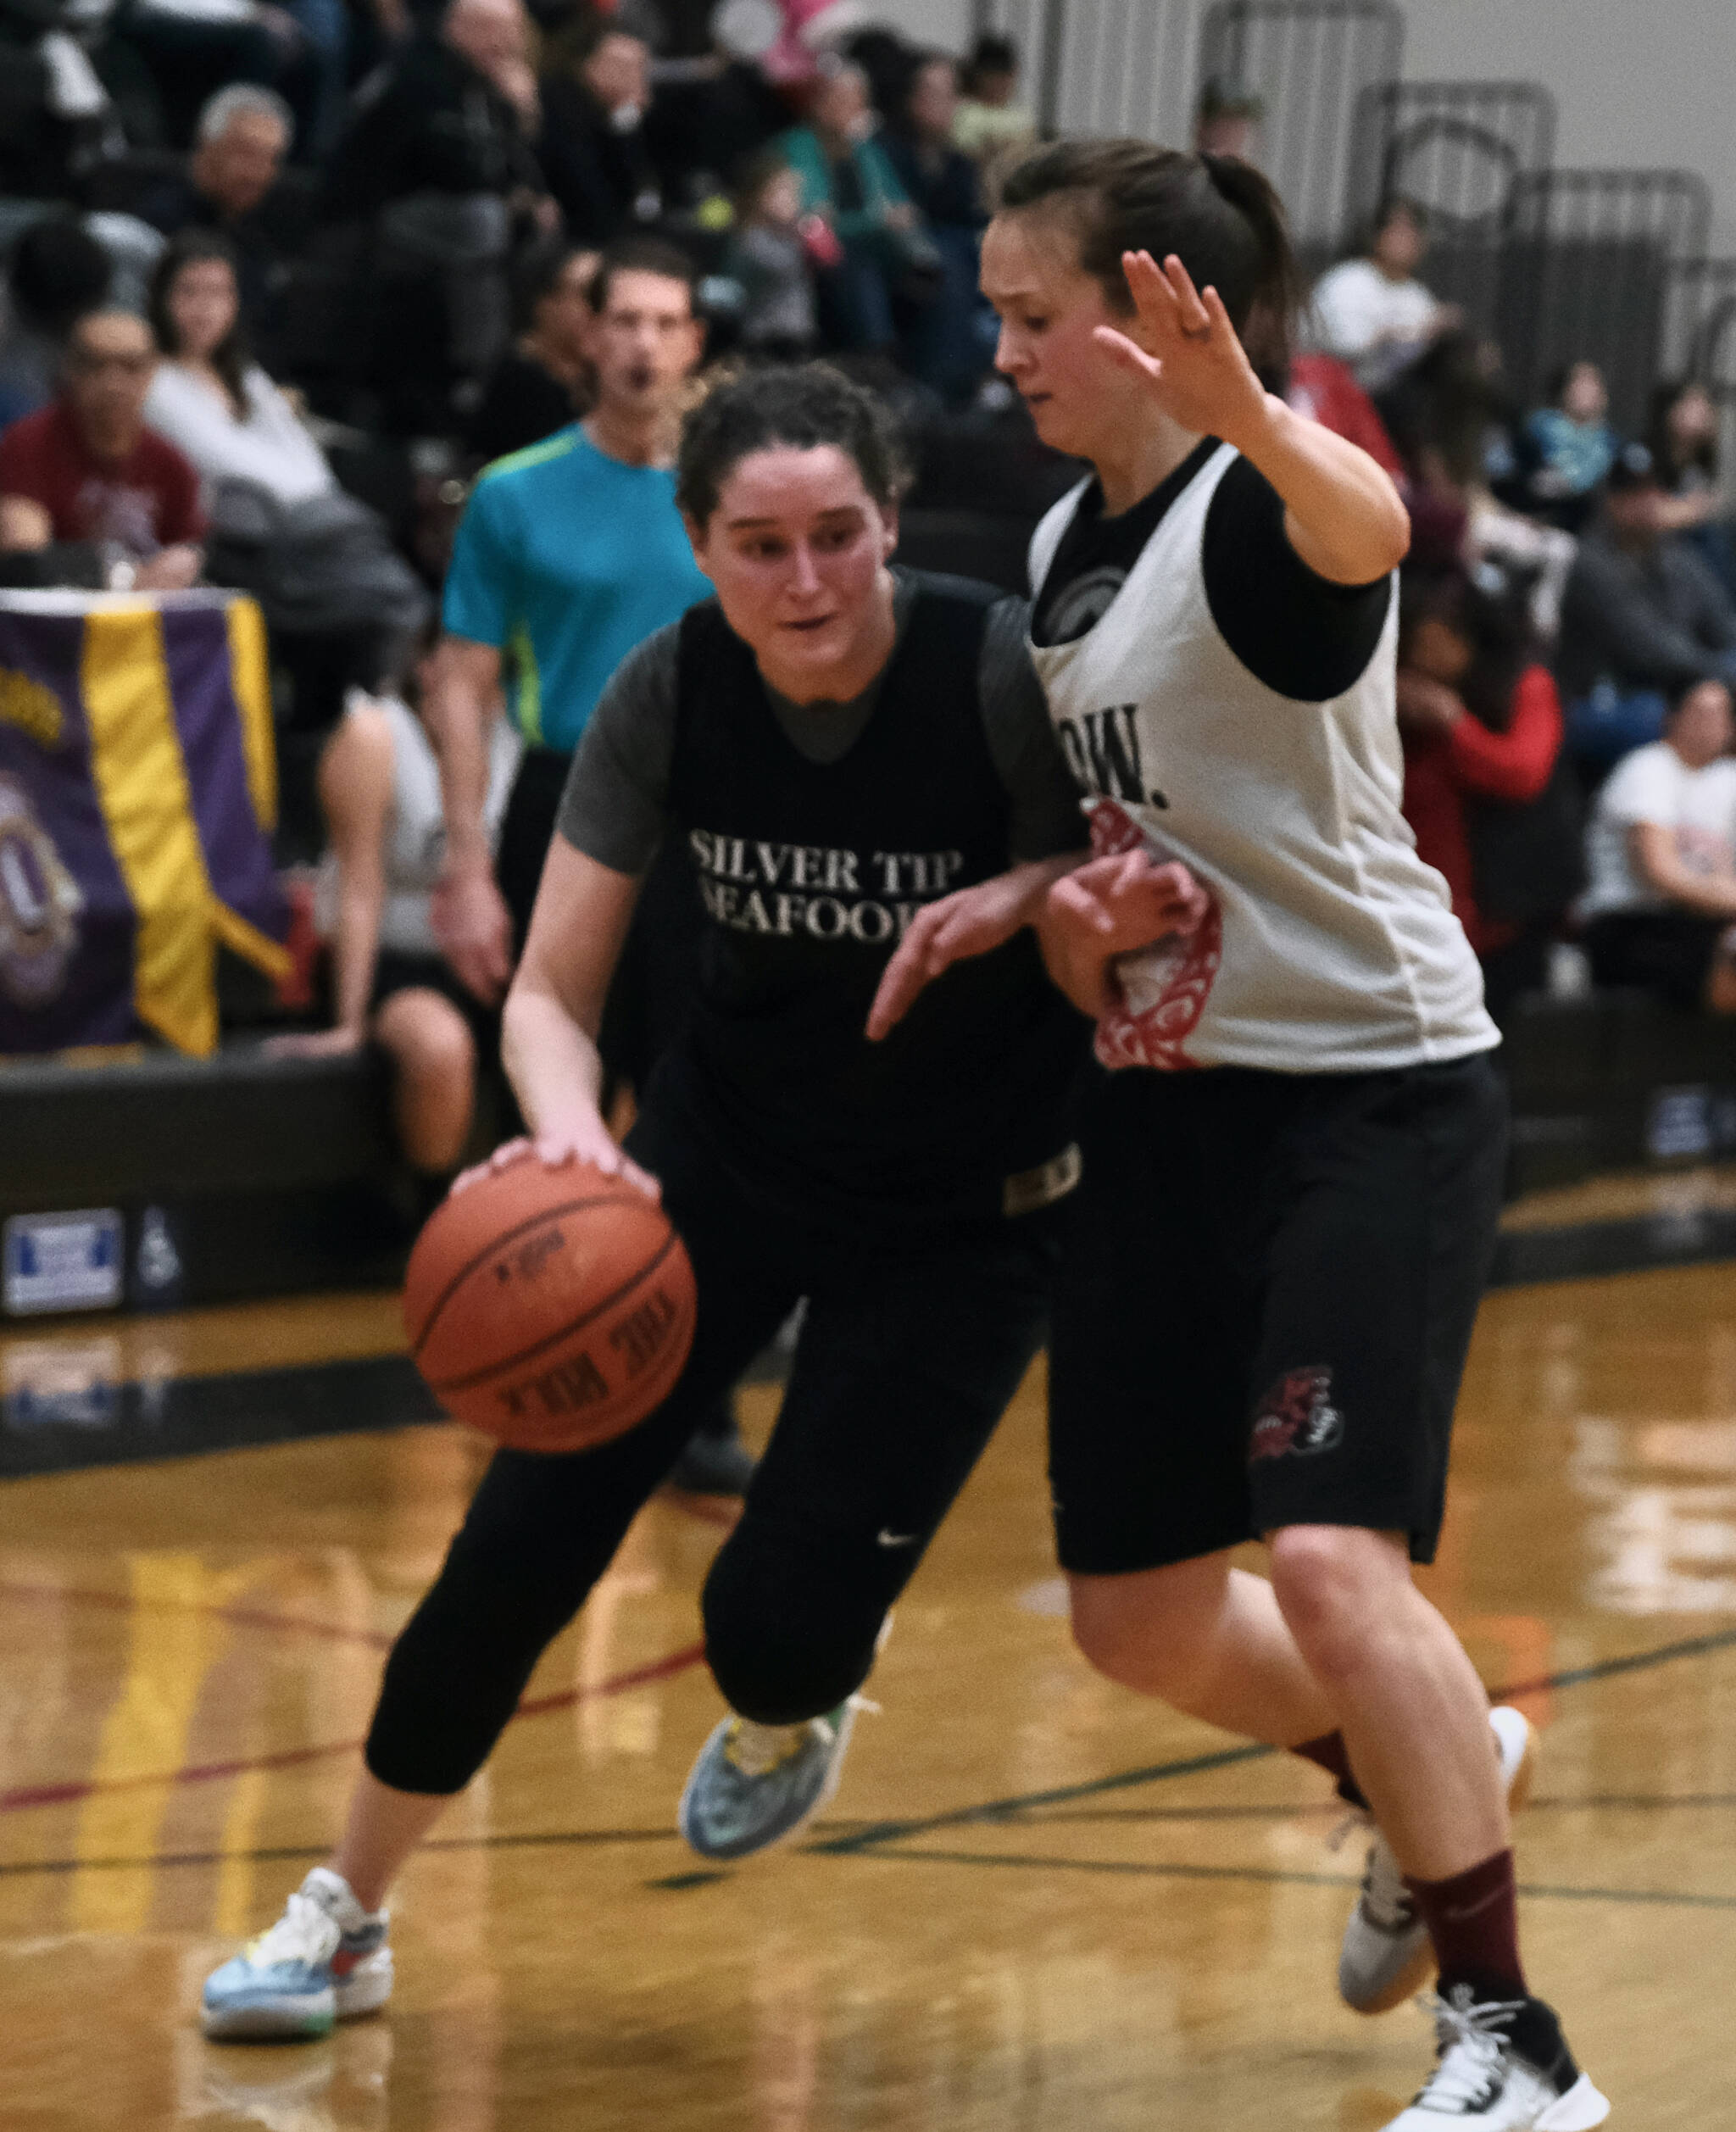 Sitka’s Lexi Smit drives against Prince of Wale’s Nani Weimer at the Gold Medal tournament, Tuesday, March 21, in the Juneau-Douglas High School: Yadaa.at Kalé gymnasium. (Klas Stolpe/For the Juneau Empire)